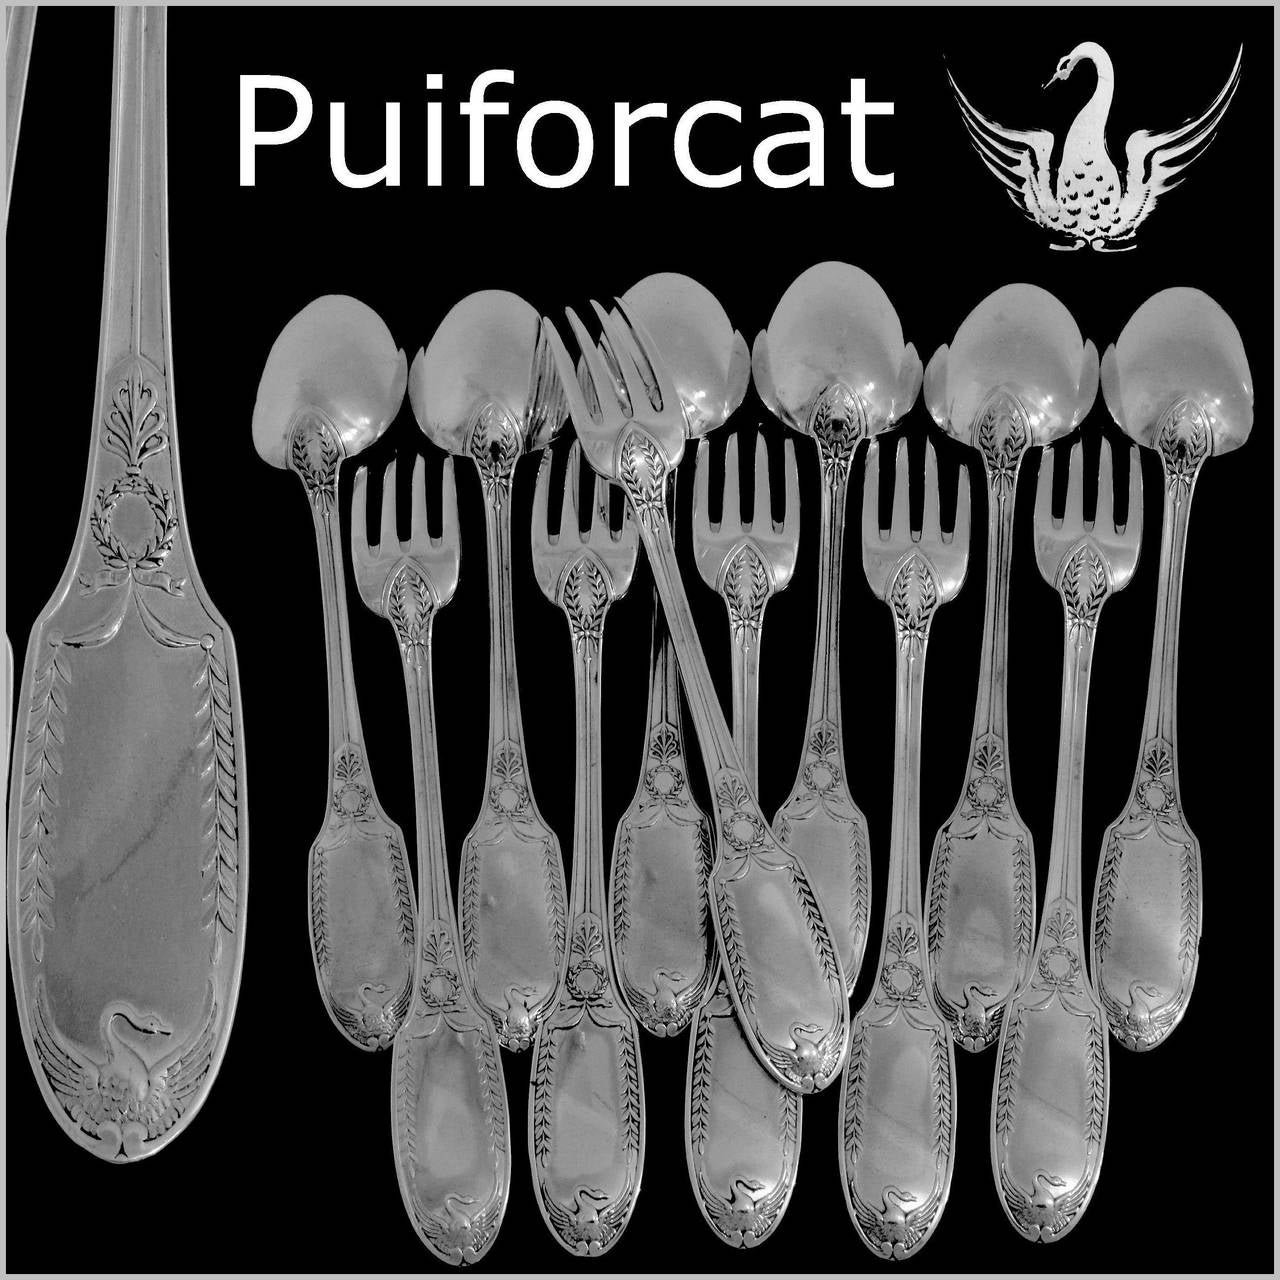 PUIFORCAT Rare French Sterling Silver Dinner Flatware Set 12 pc Swans

Head of Minerve 1 st titre for 950/1000 French Sterling Silver guarantee

Exceptional French sterling silver Dinner Flatware 12 pc Empire style, the spatulas are carved on